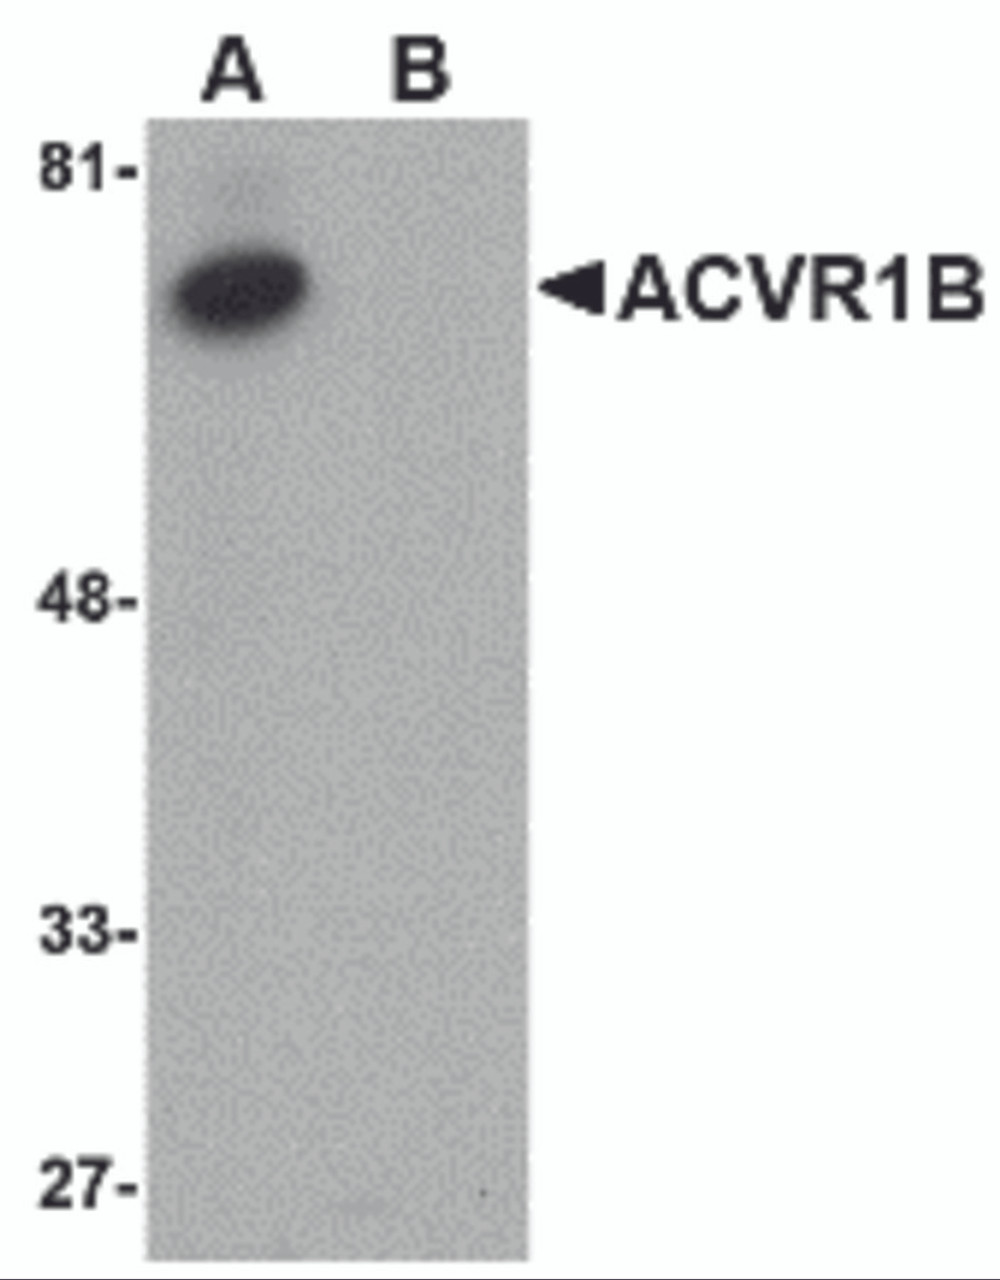 Western blot analysis of ACVR1B in human kidney tissue lysate with ACVR1B antibody at 1 &#956;g/mL in (A) the absence and (B) the presence of blocking peptide.